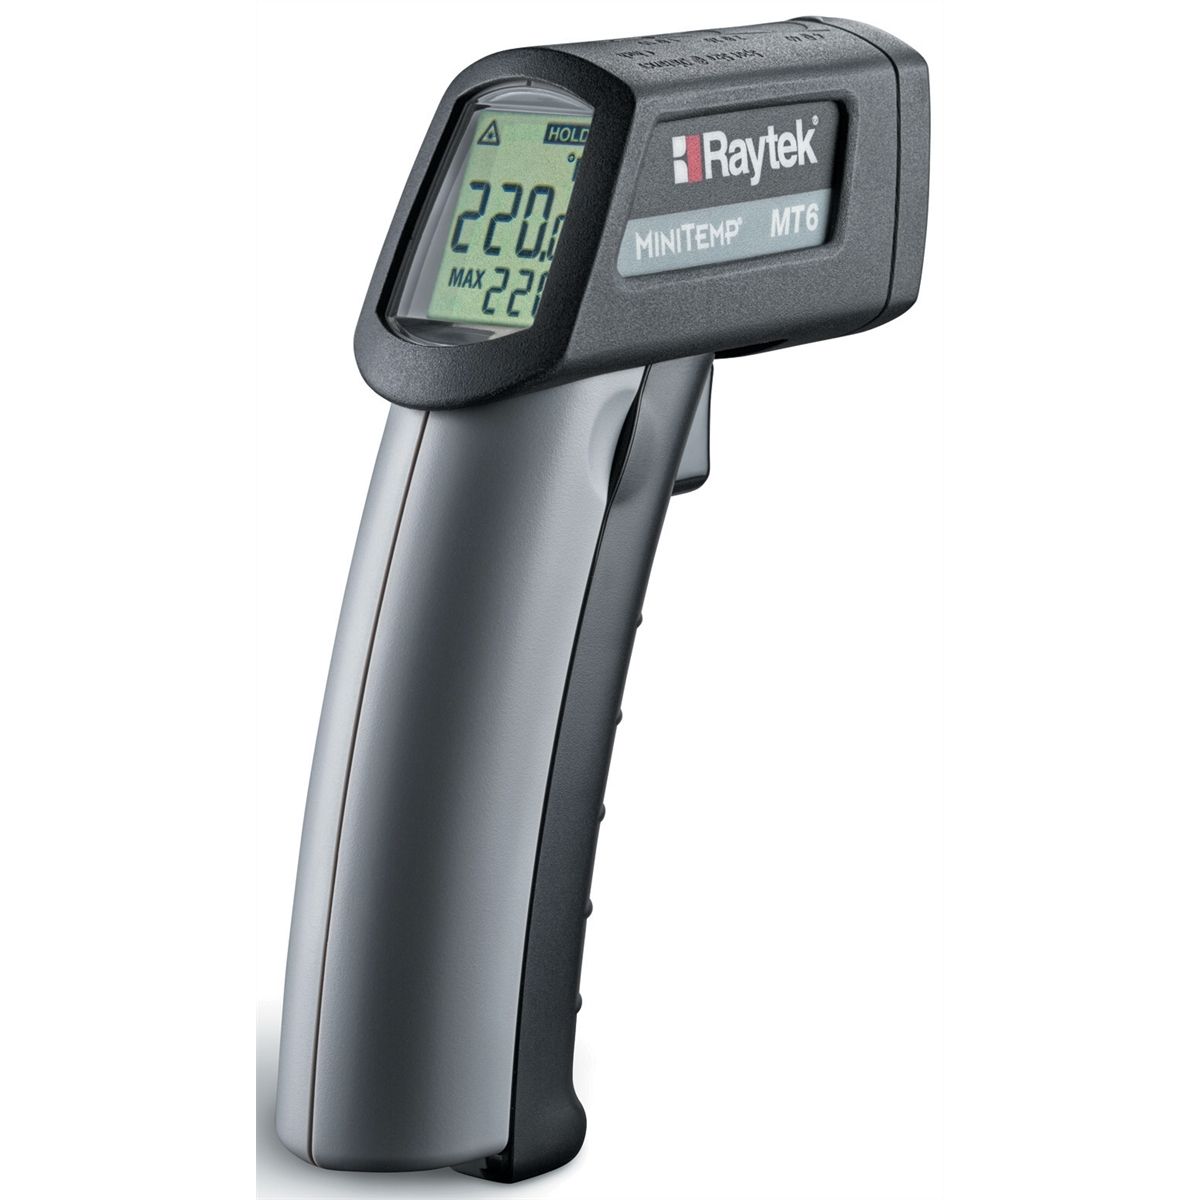 MT6 Mini Temp Non-Contact Thermometer w/ Laser Sighting -20 to 9